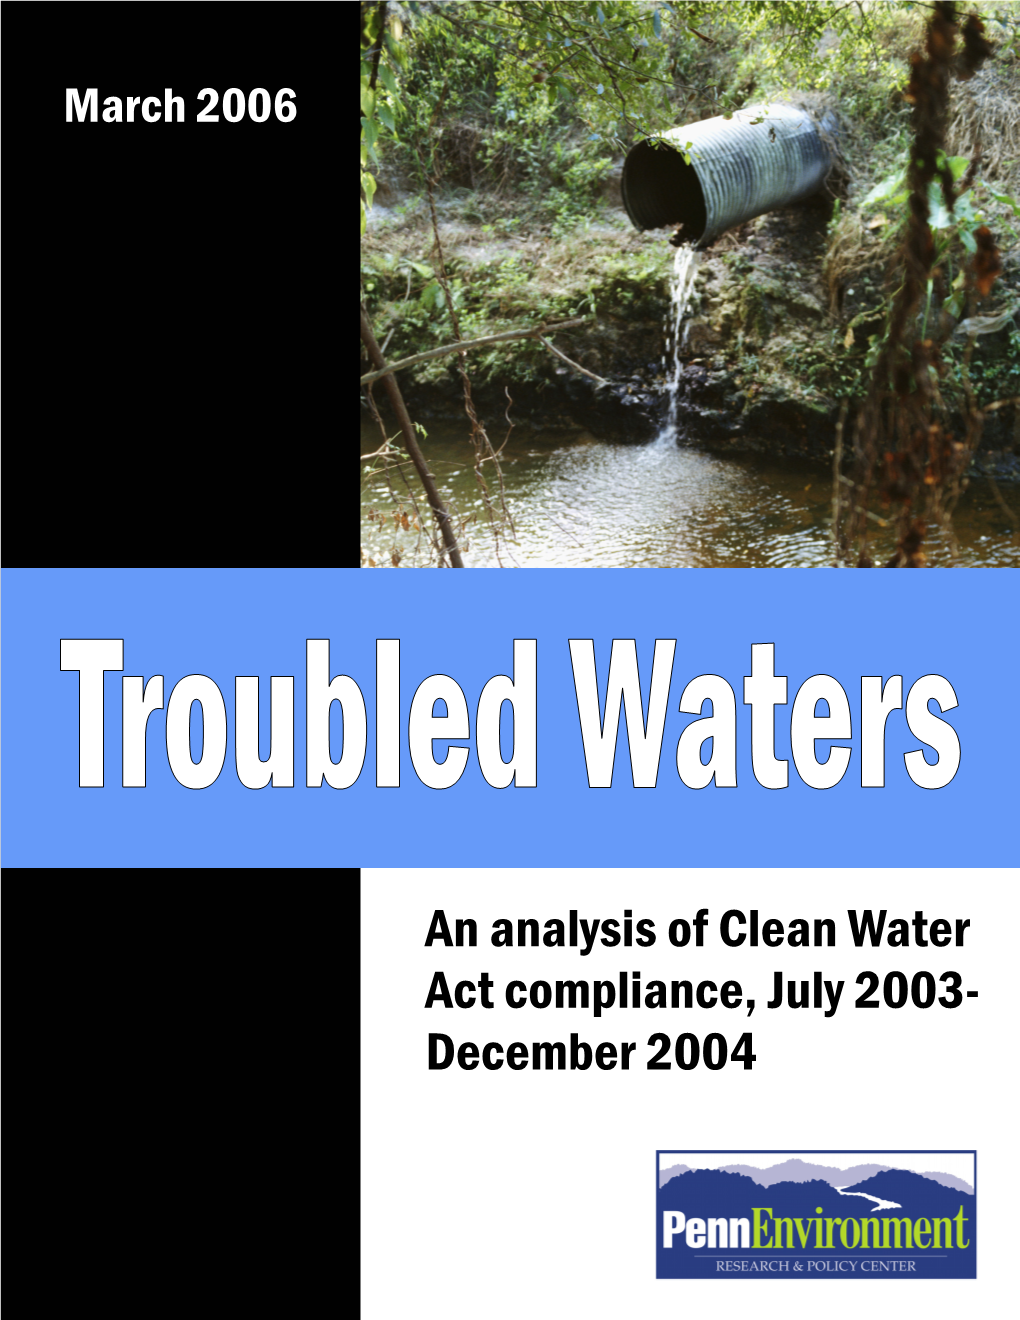 An Analysis of Clean Water Act Compliance, July 2003- December 2004